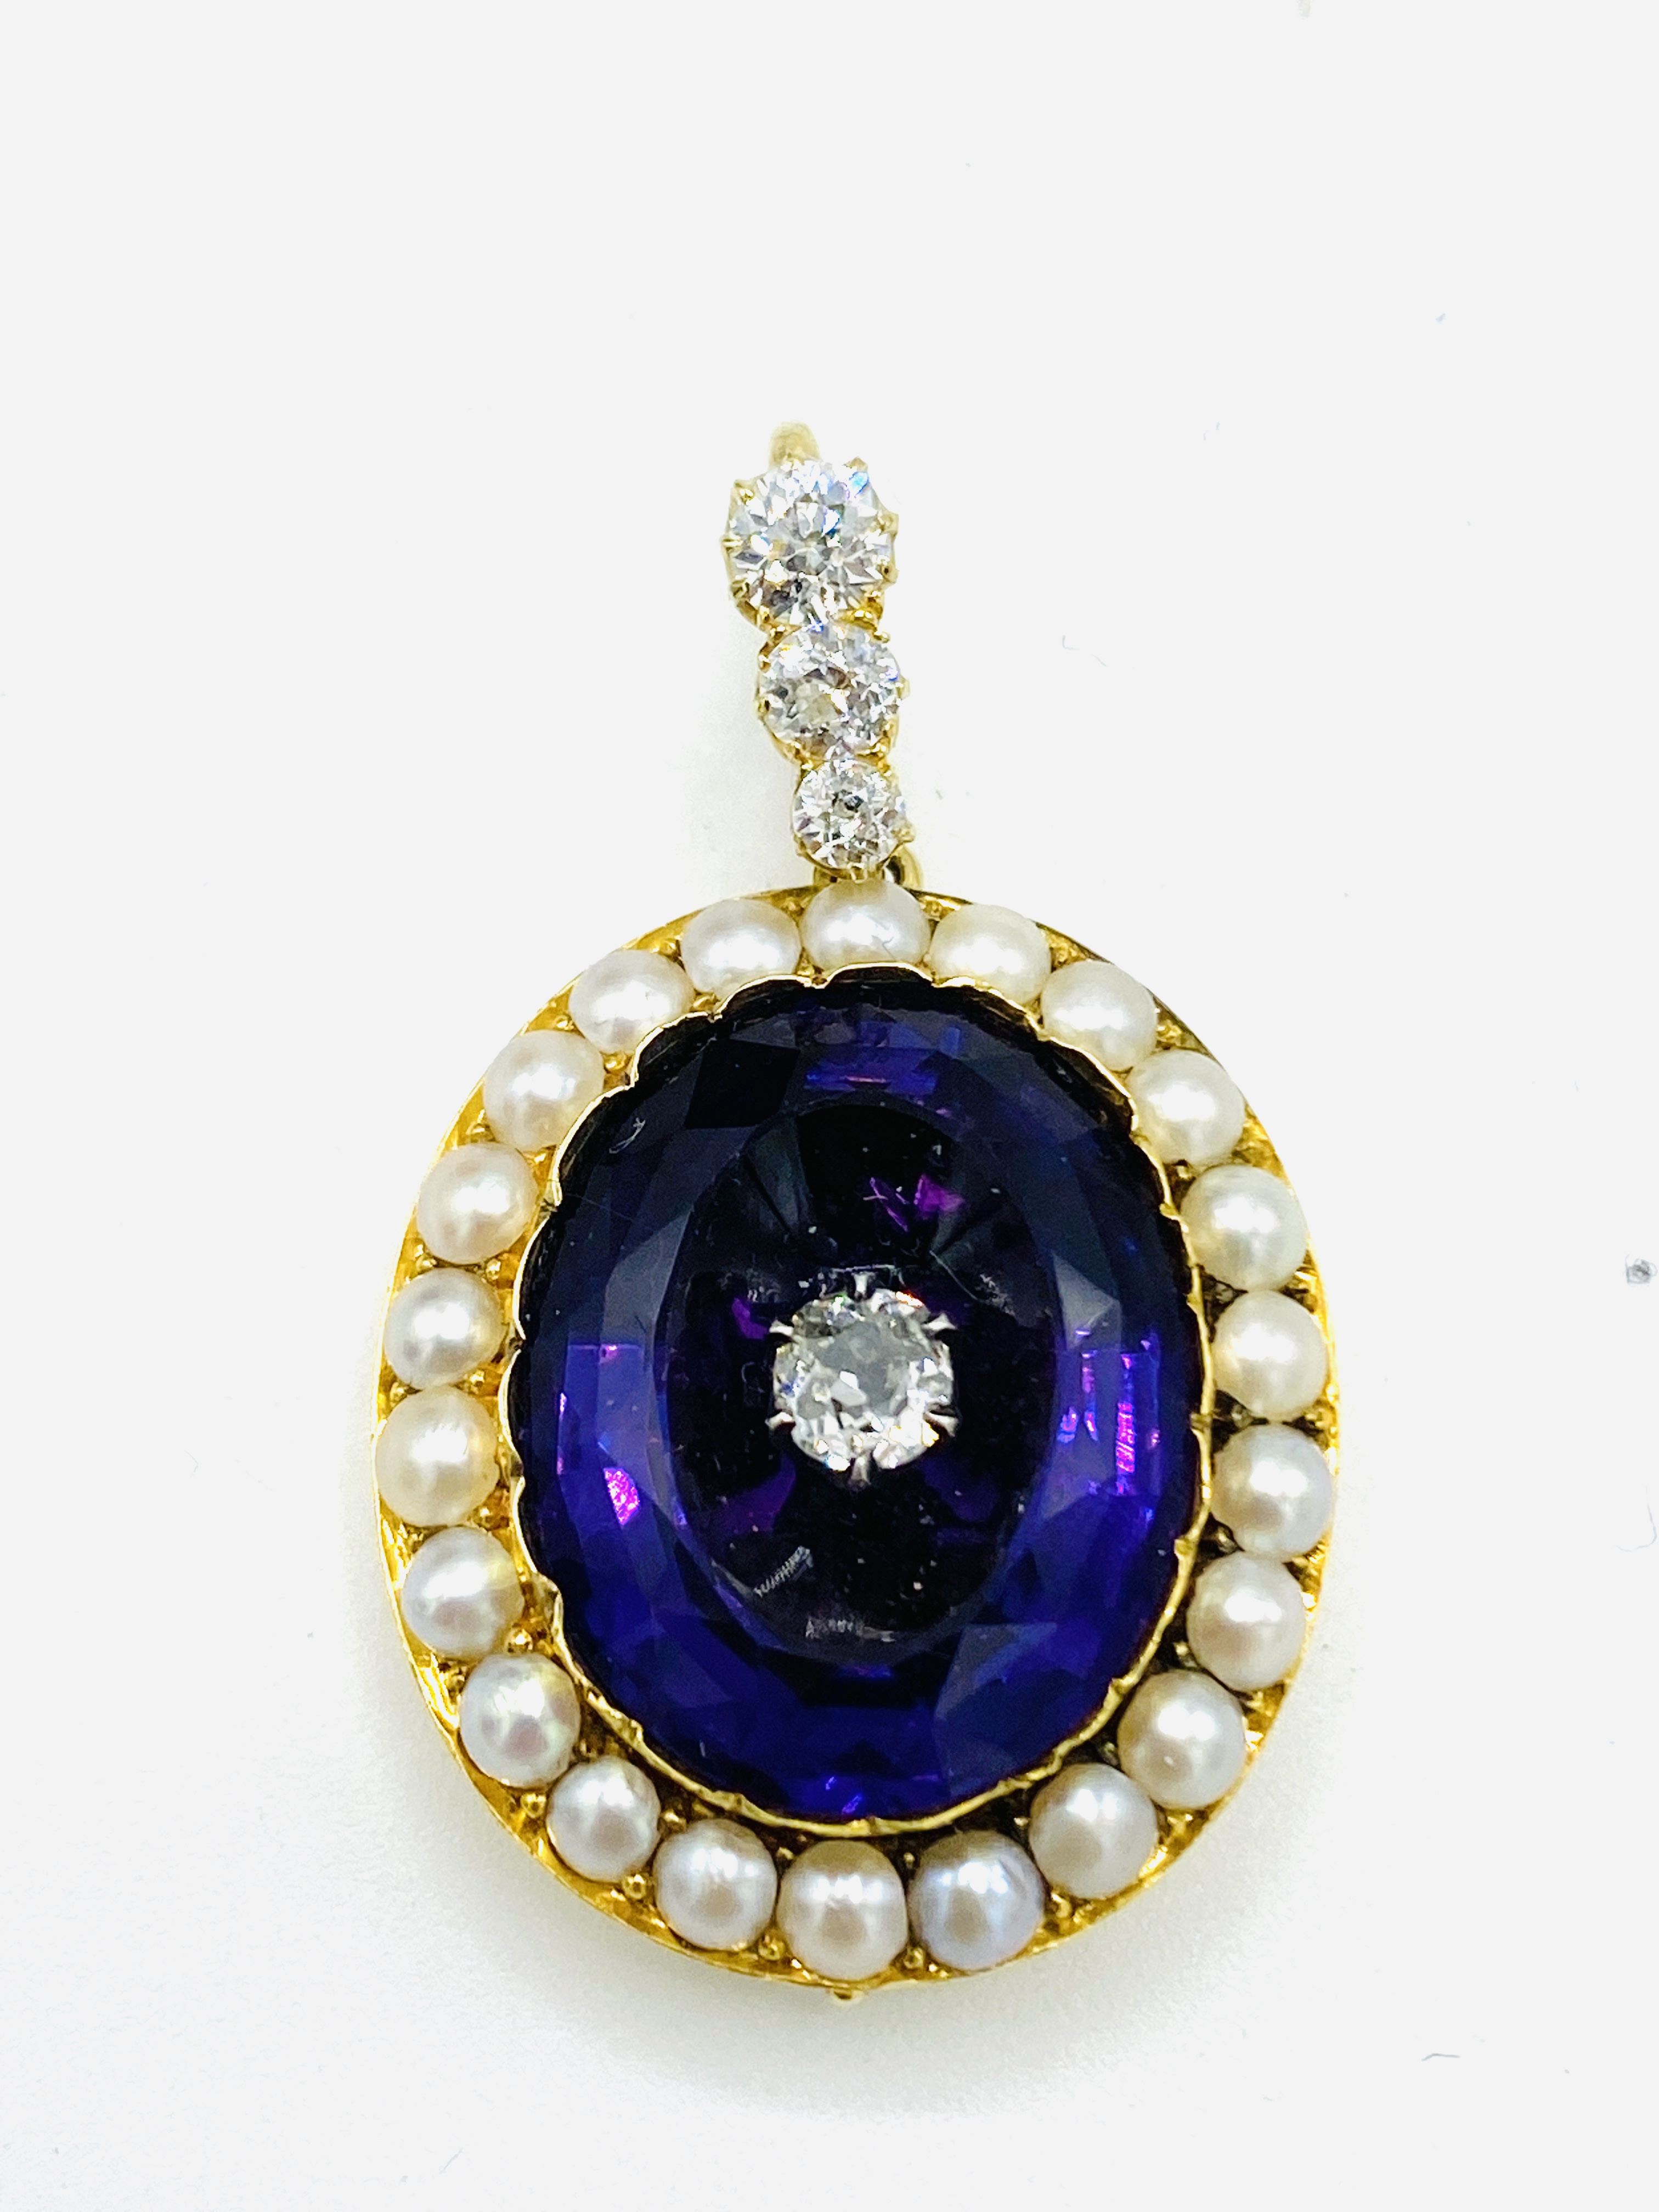 Victorian gold, amethyst and diamond pendant and earring set - Image 2 of 10